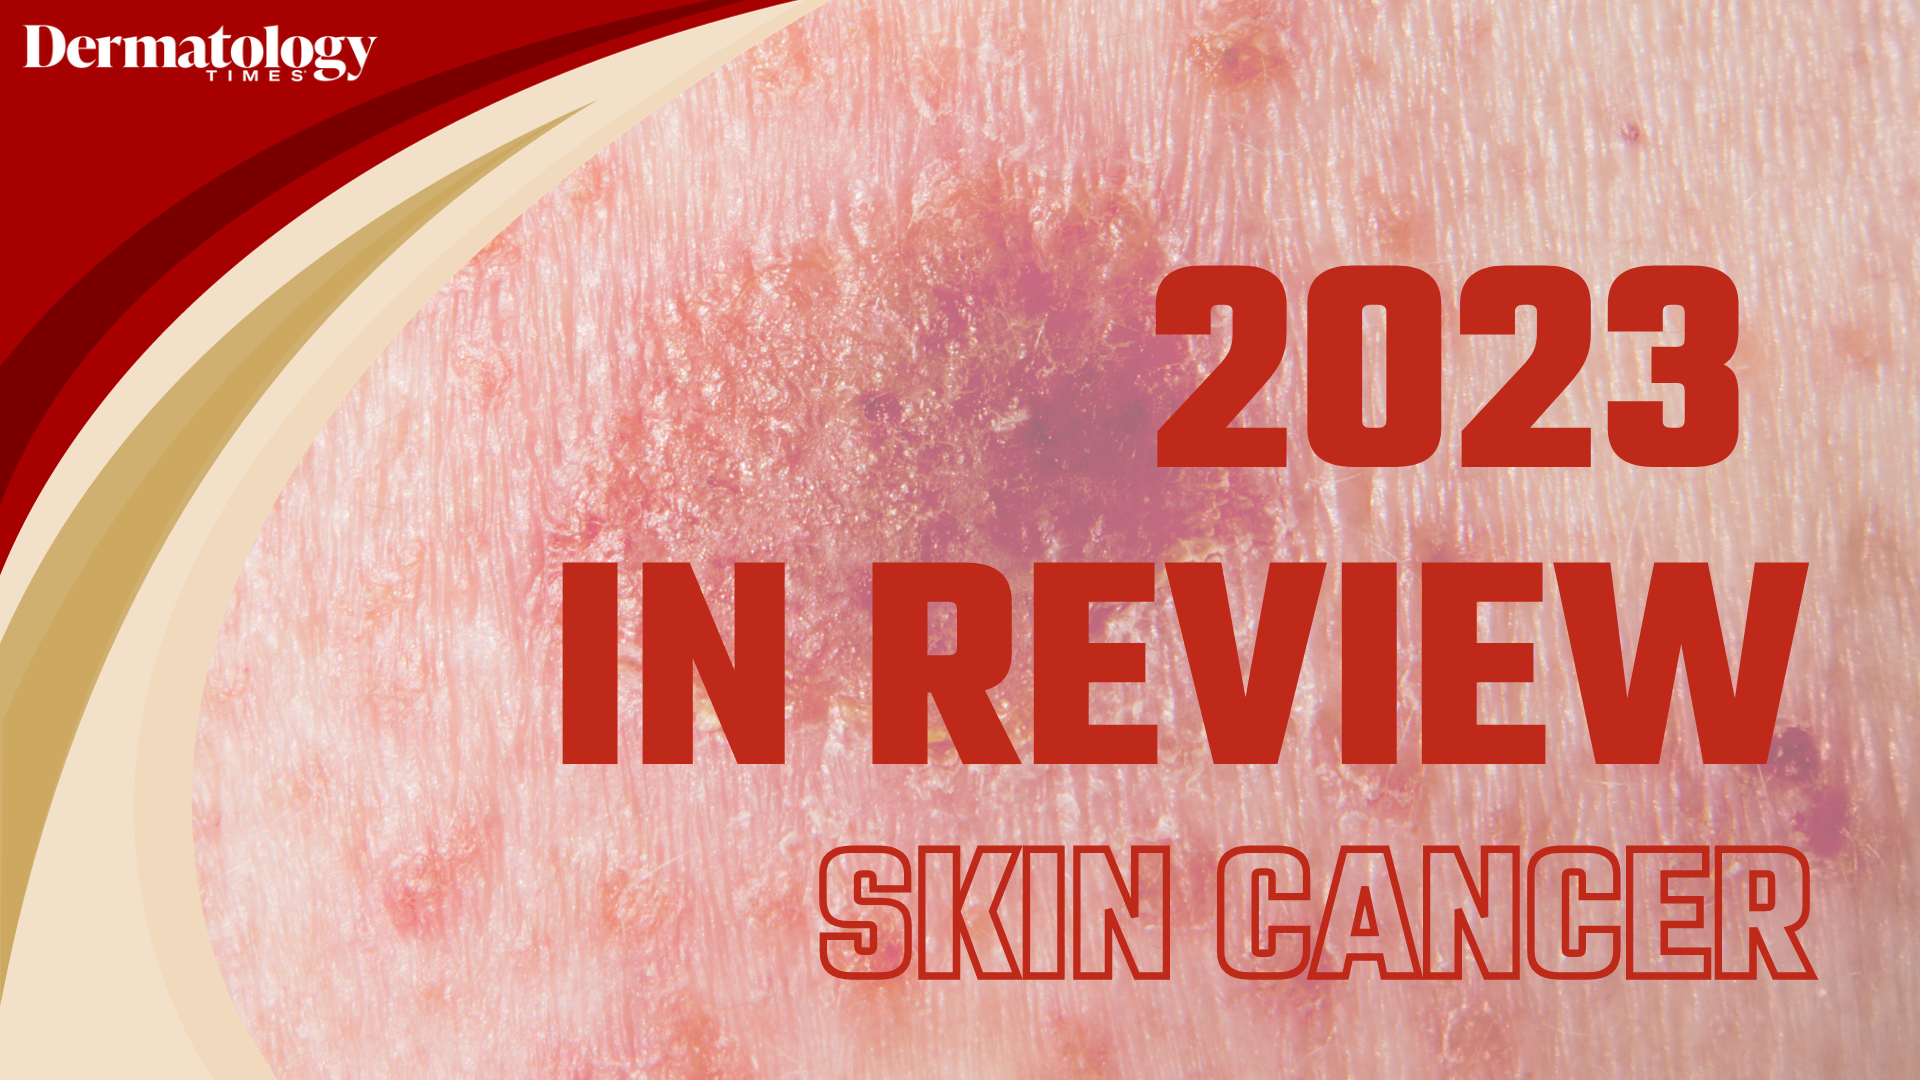 Dermatology Times 2023 In Review: Skin Cancer